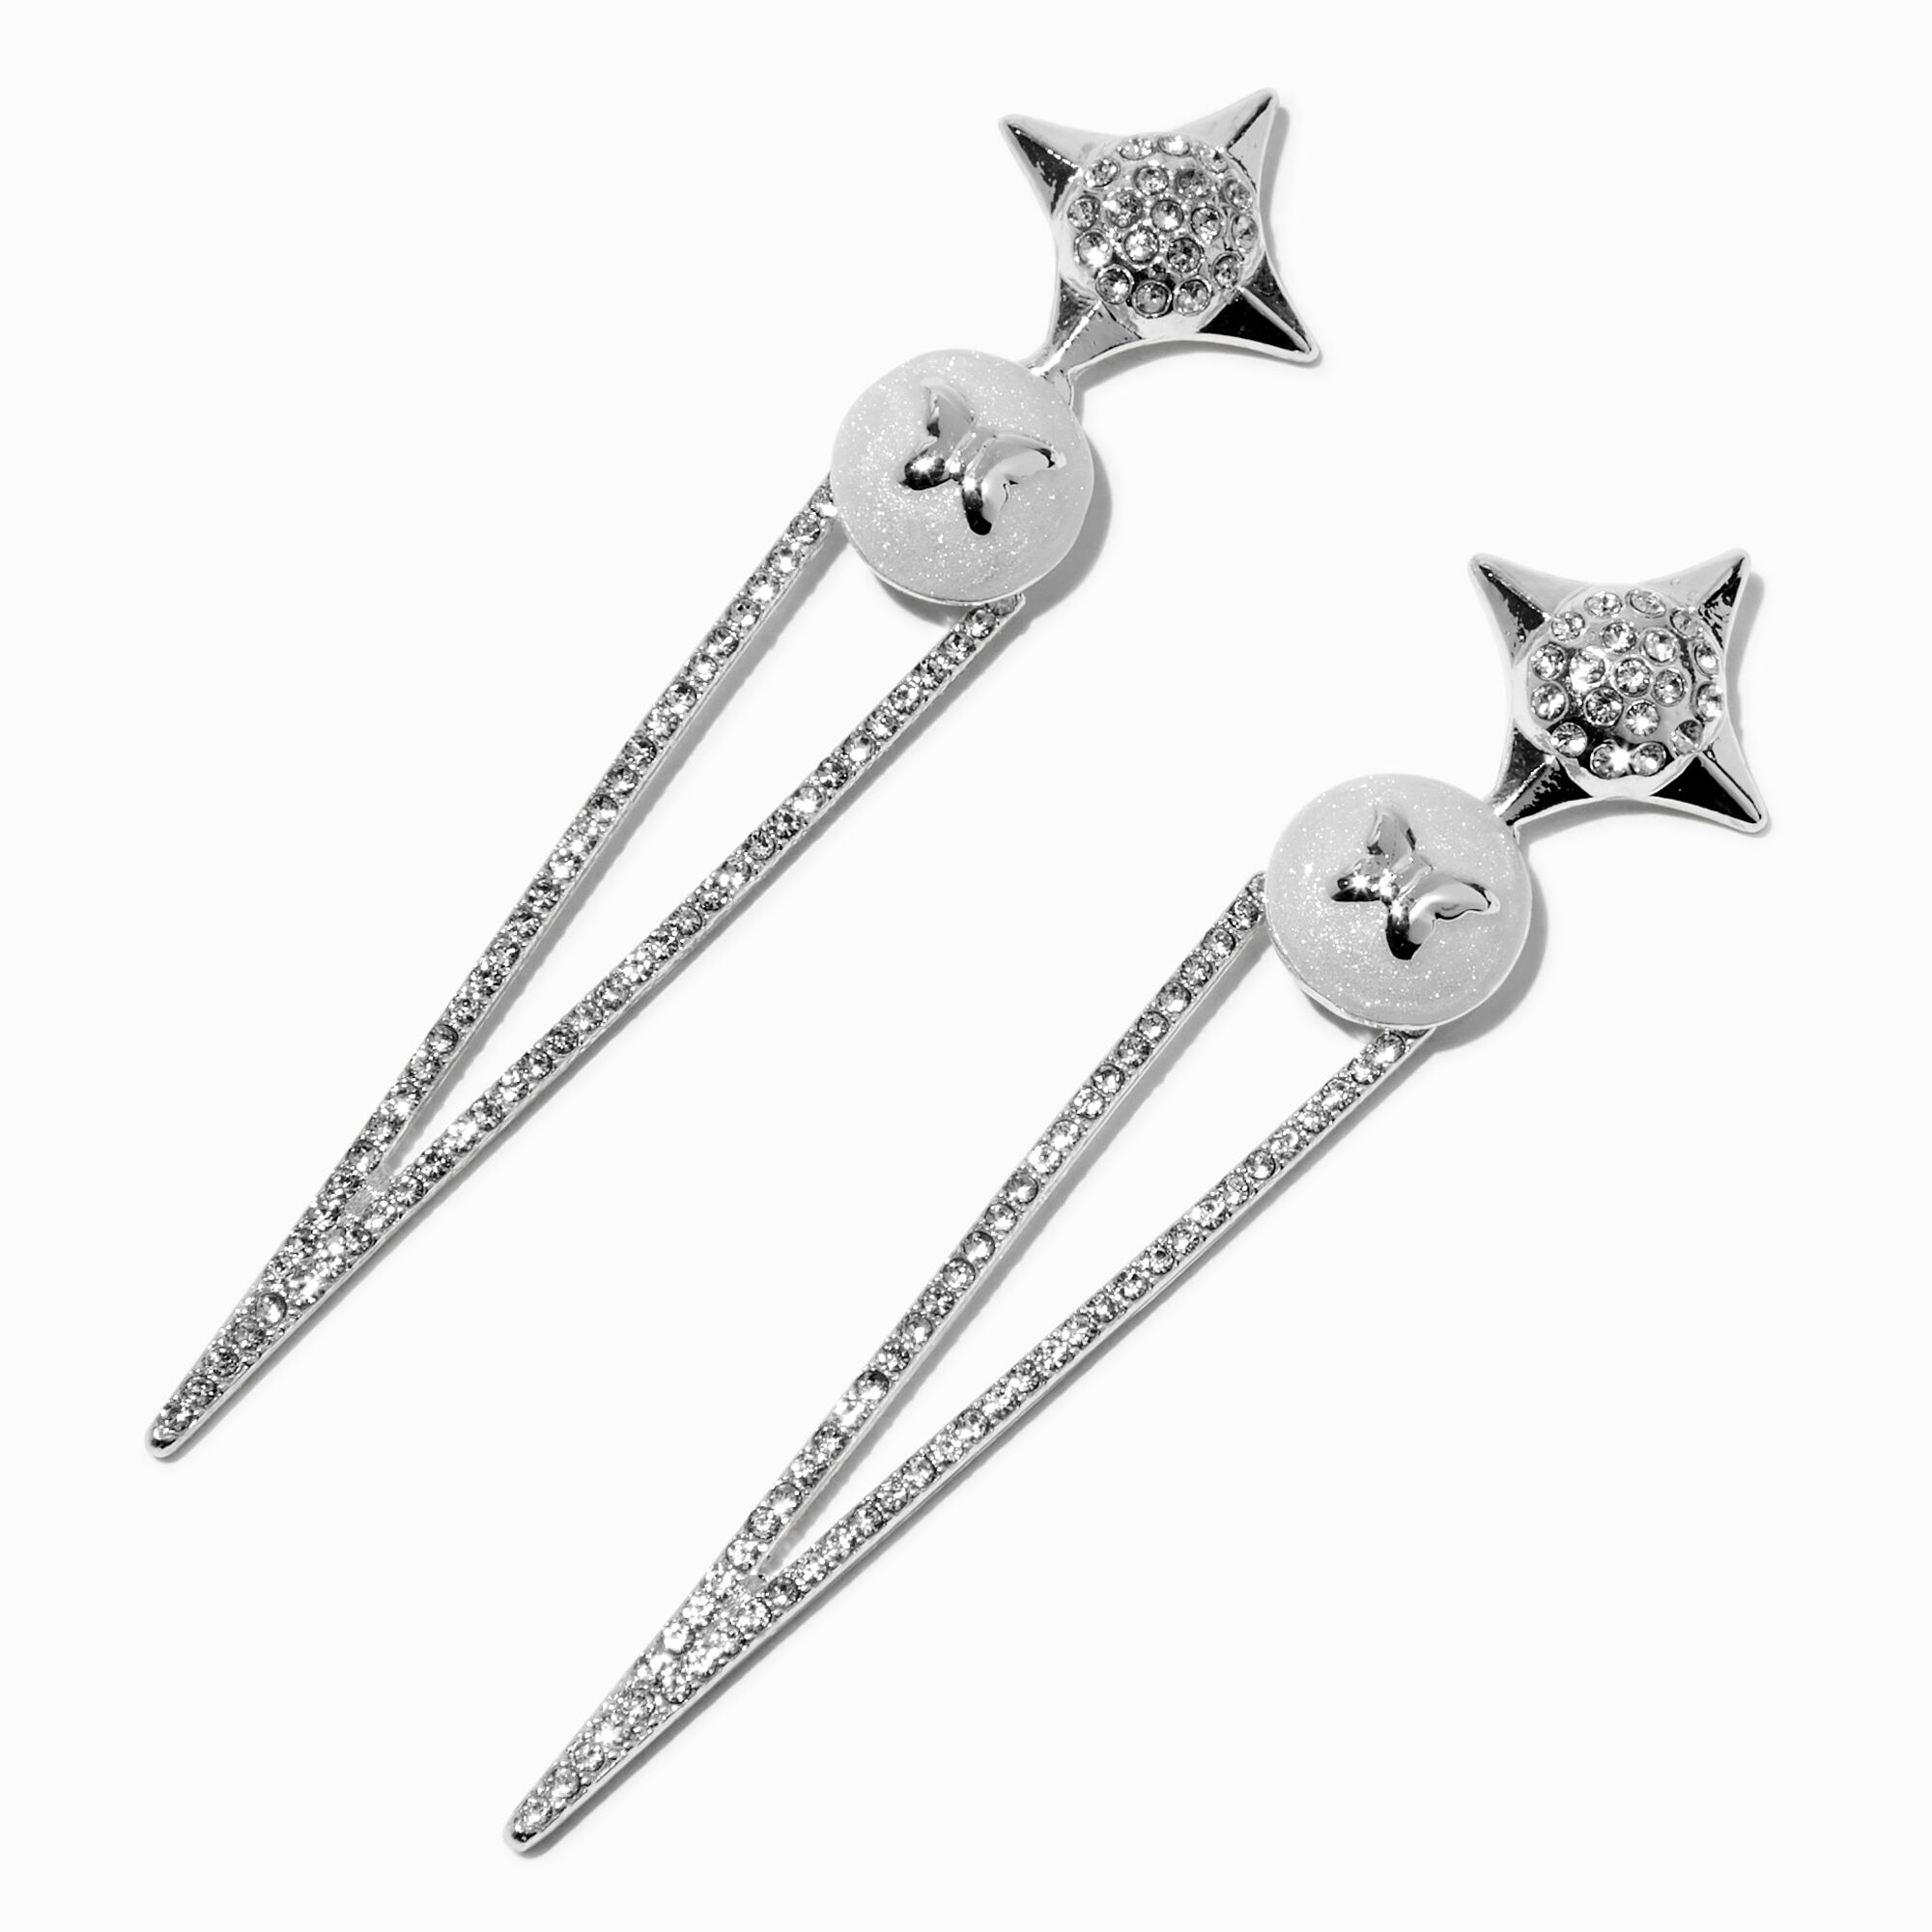 View Claires Tone Butterfly Spike 3 Drop Earrings Silver information